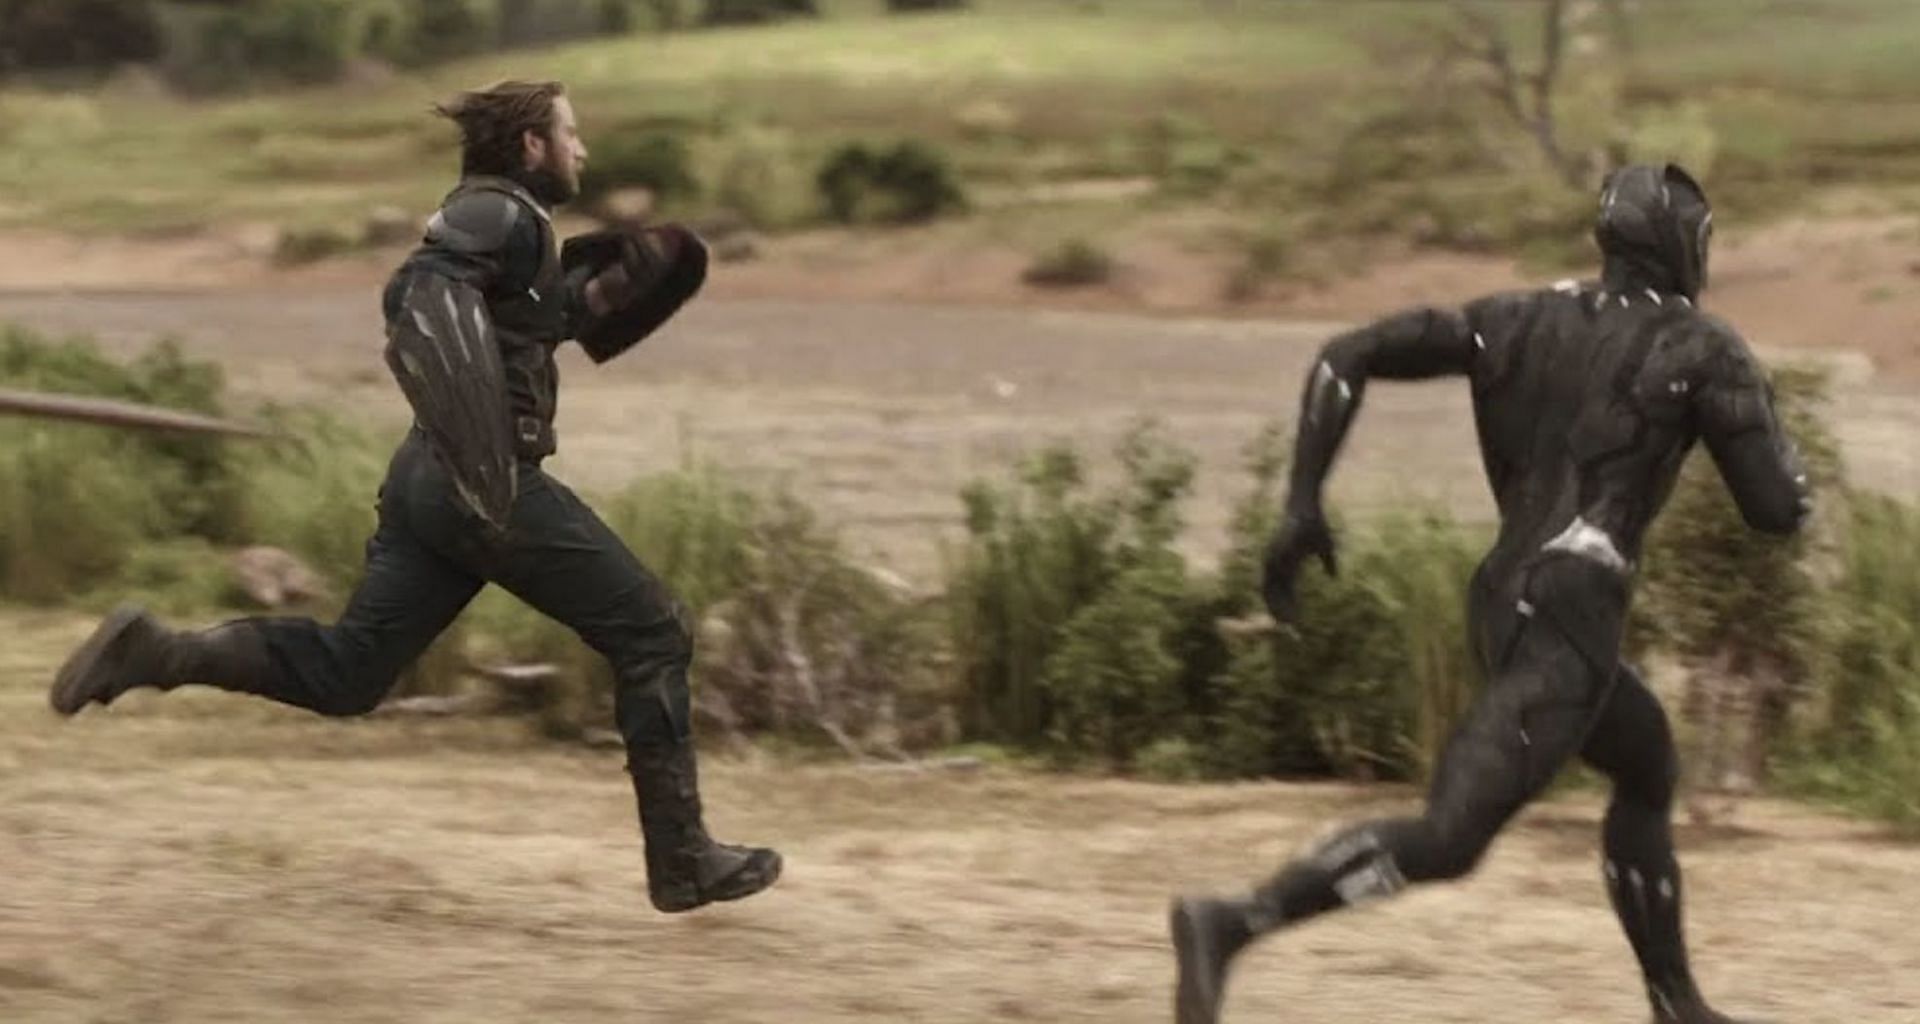 Steve Rogers&#039; incredible speed is a game-changer in combat situations (Image via Marvel Studios)